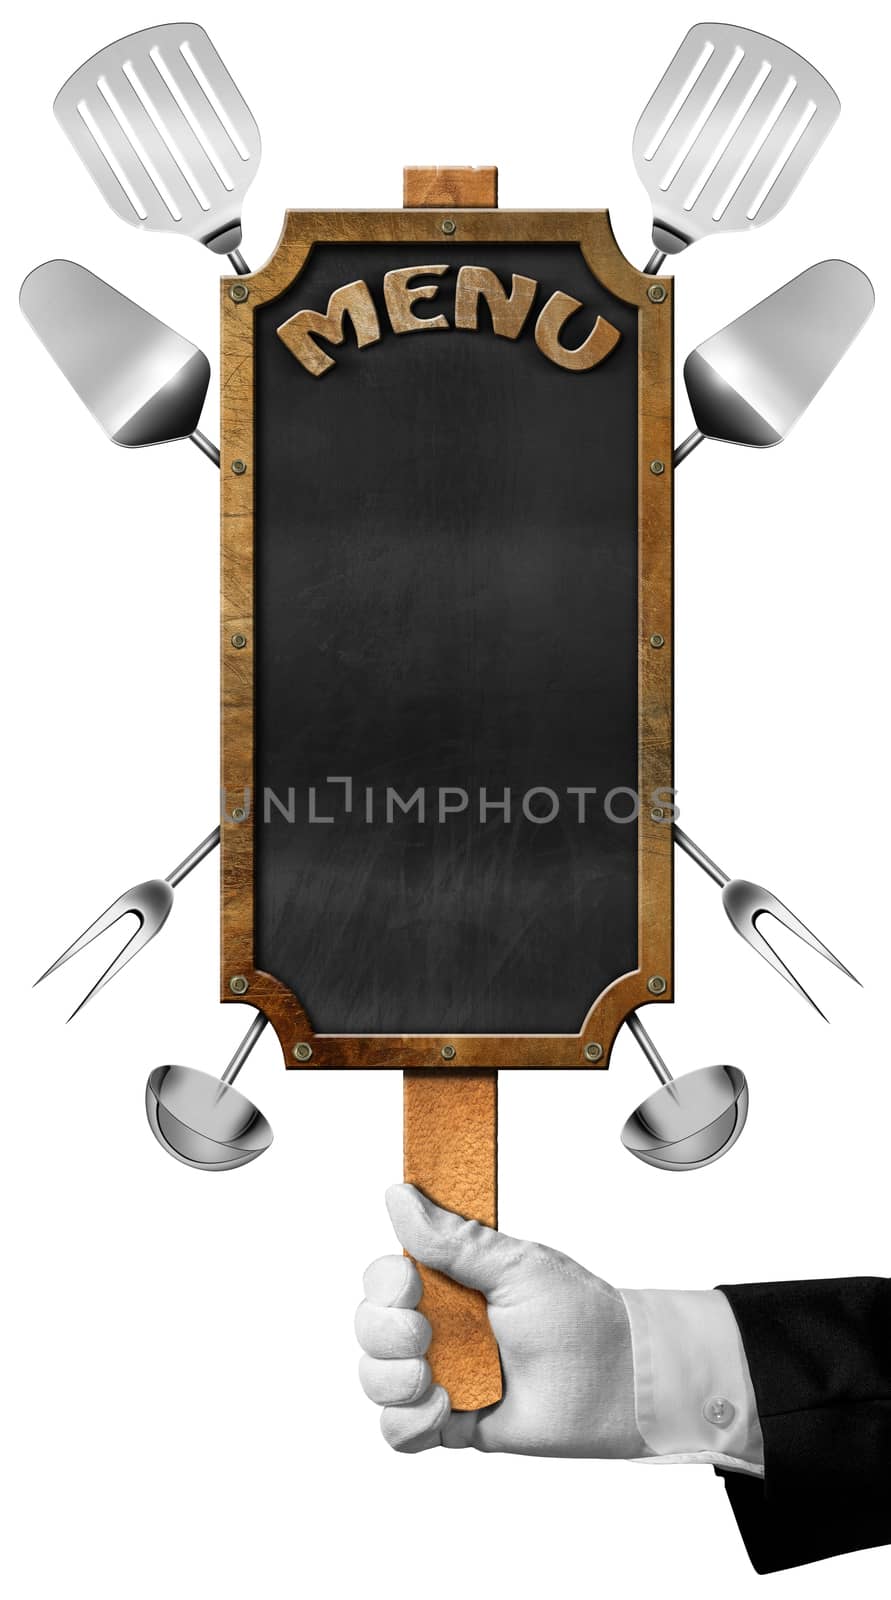 Hand of waiter with white glove holding a pole with empty blackboard with metallic frame, text menu and kitchen utensils. Isolated on a white background